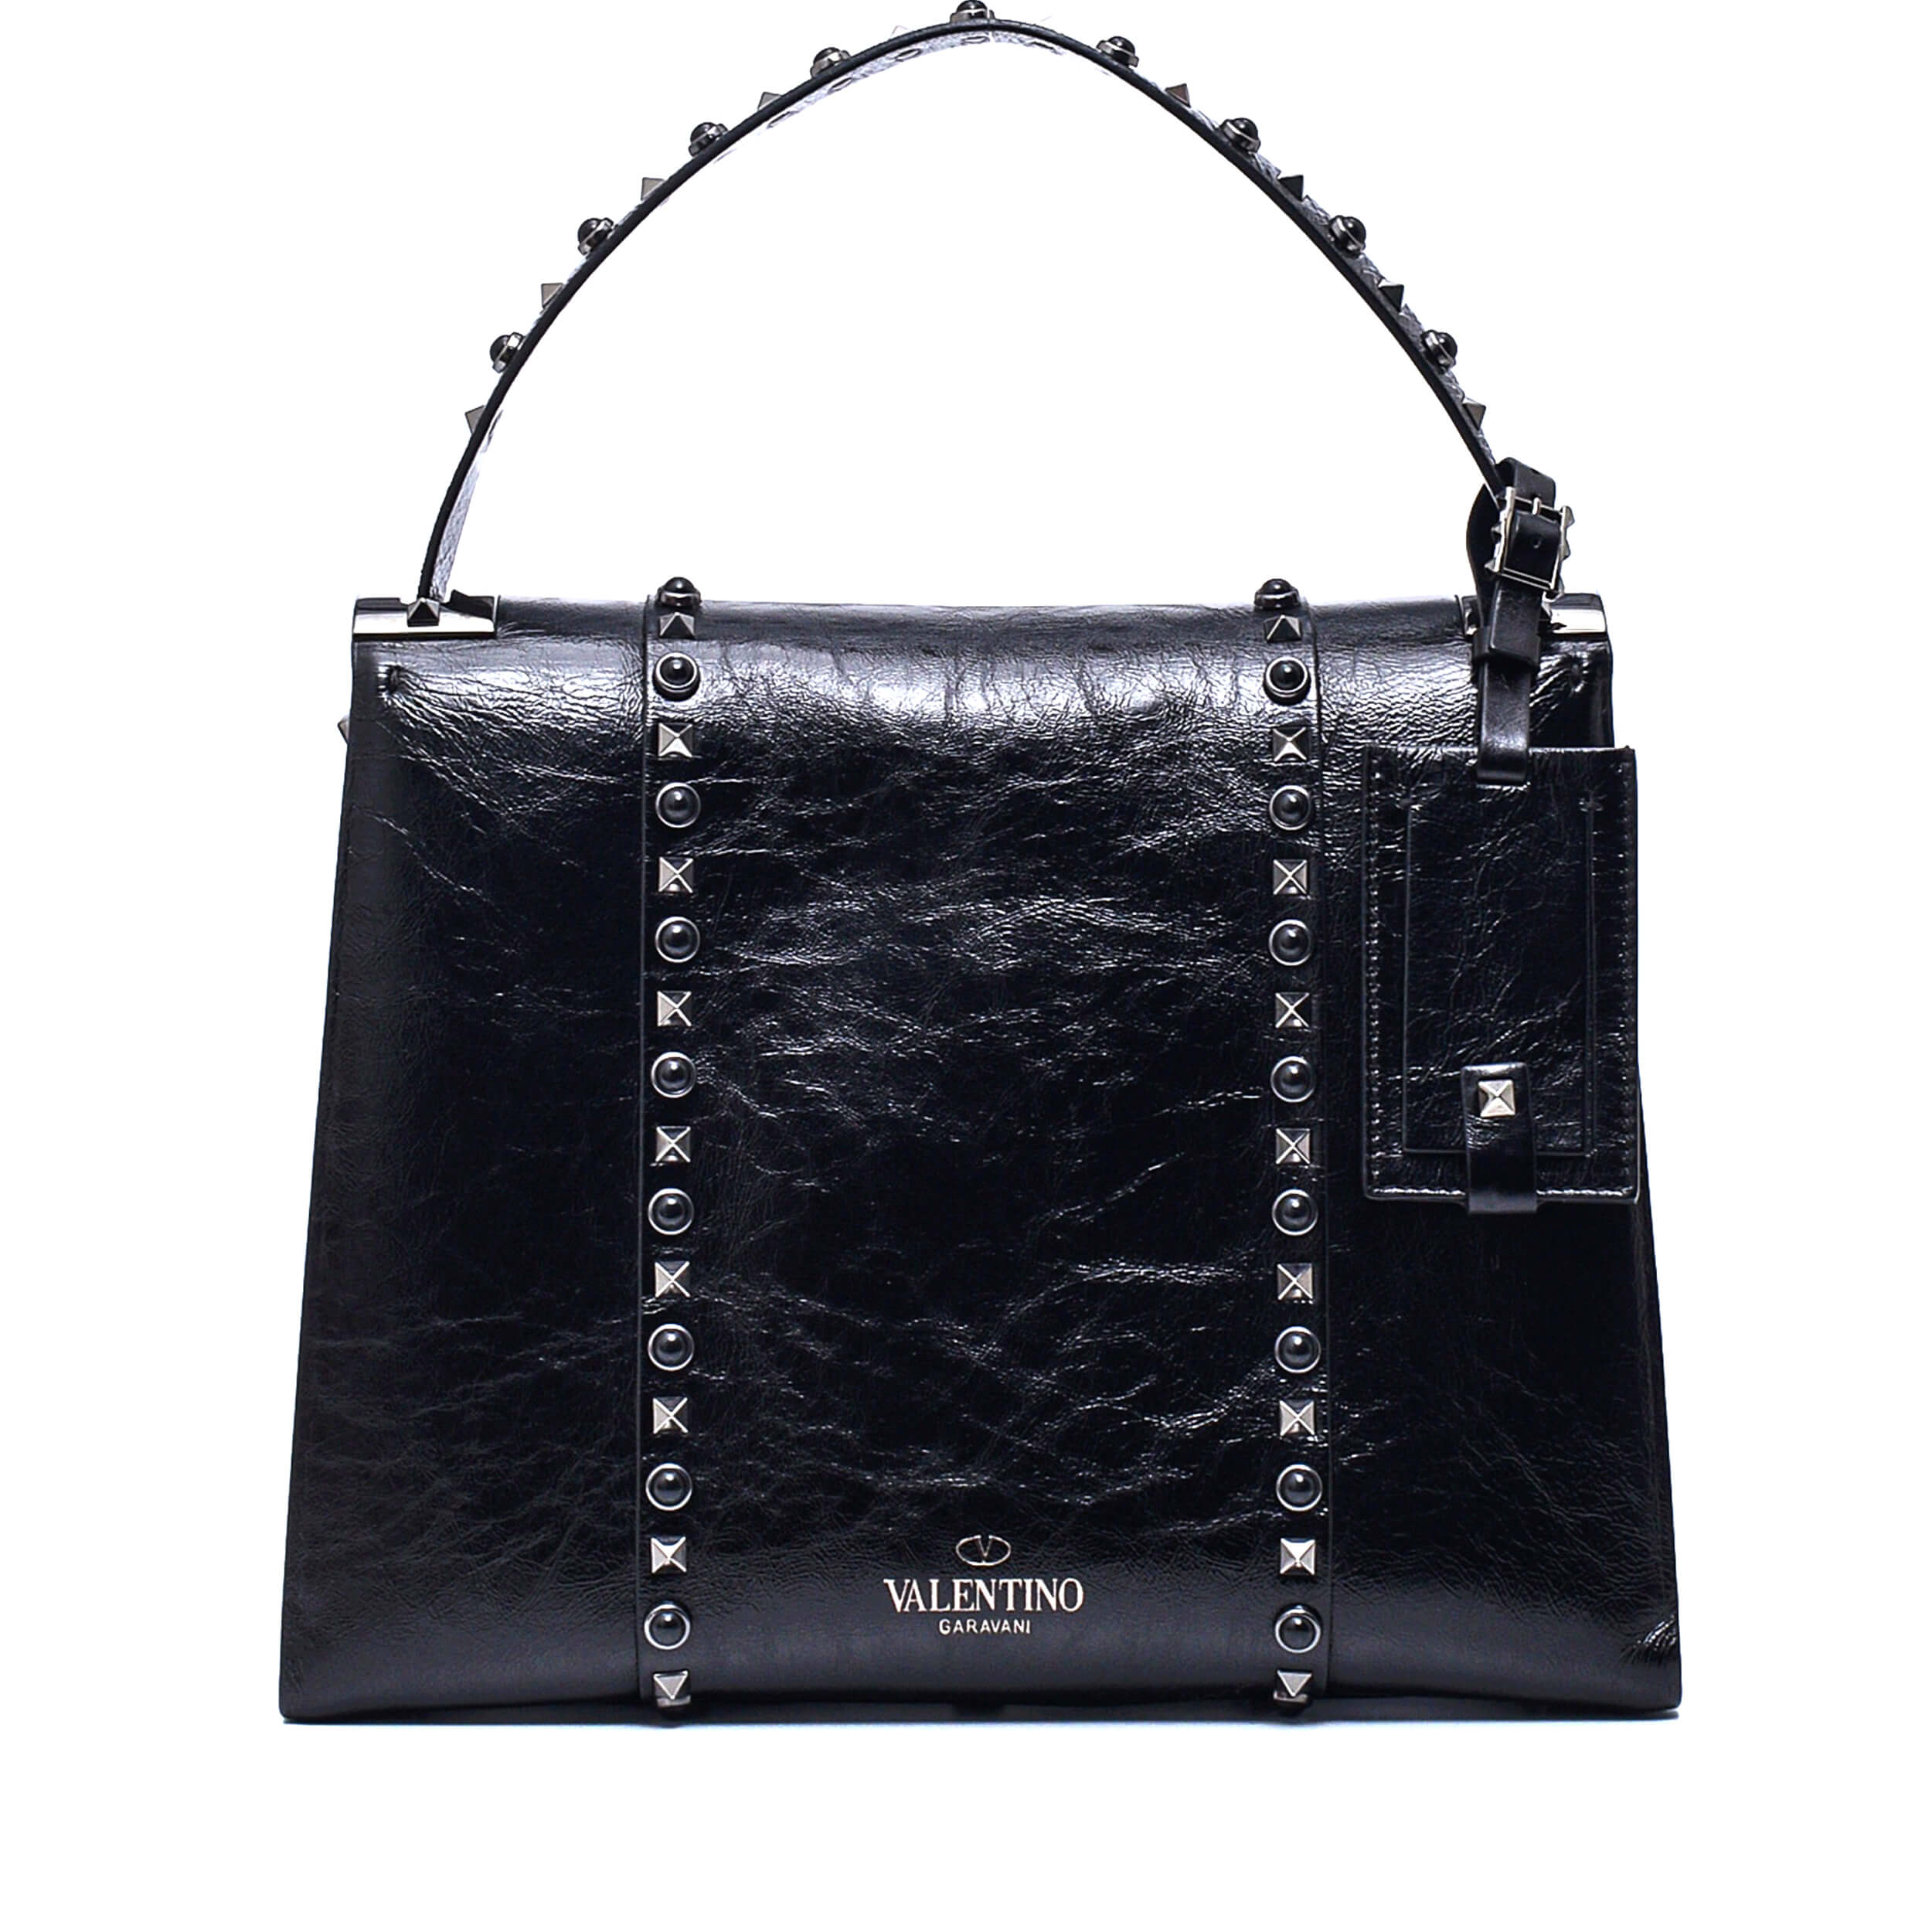 Valentino- So Black Patent Leather My Rockstud Rolling Tote Bag